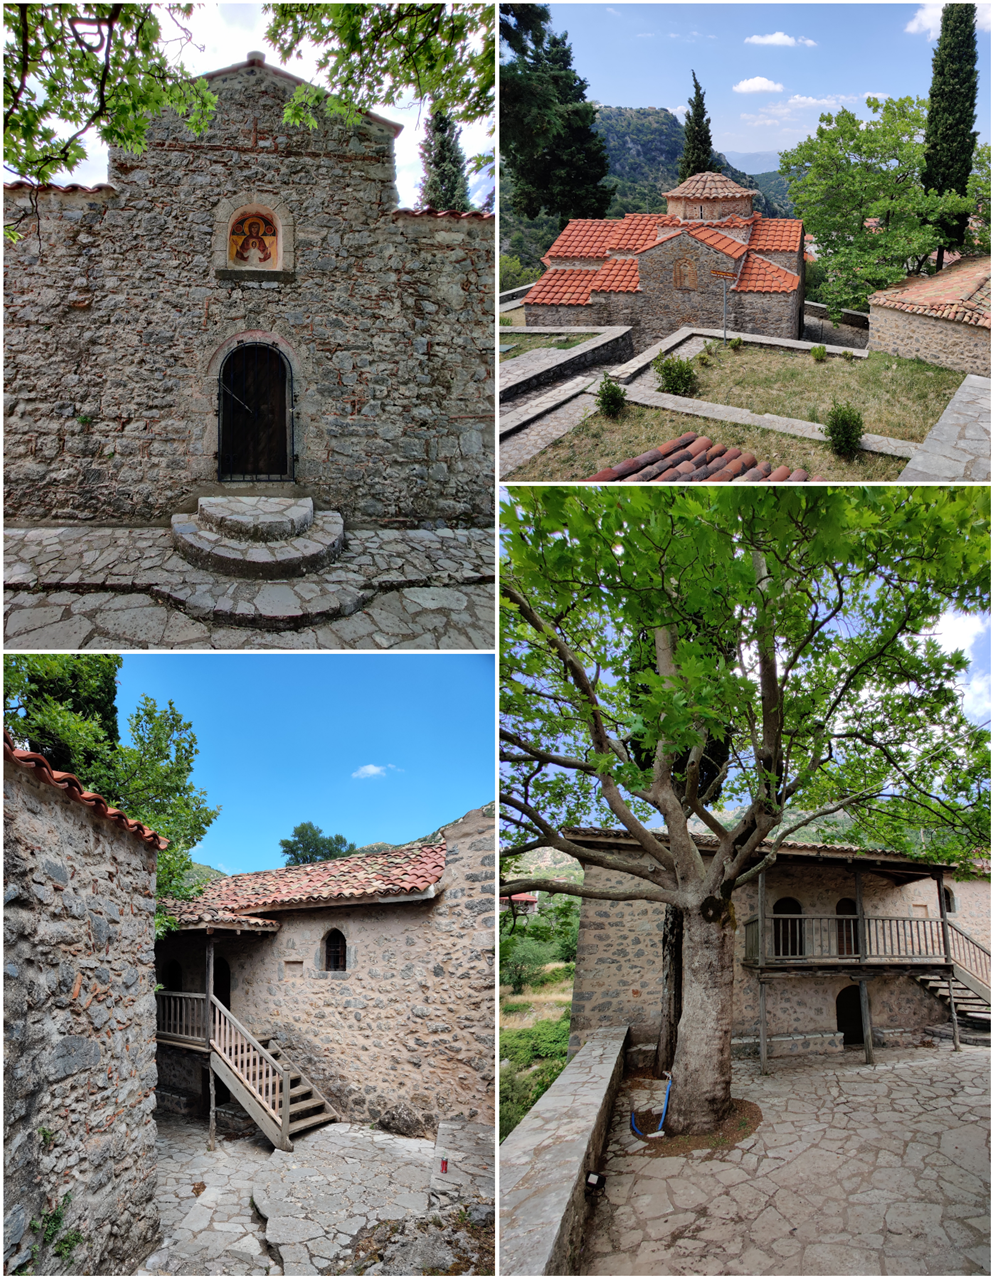 Stemnitsa. The monastery of the “Mother of God of the Life-giving Spring” (Ιερά Μονή Ζωοδόχου Πηγής).